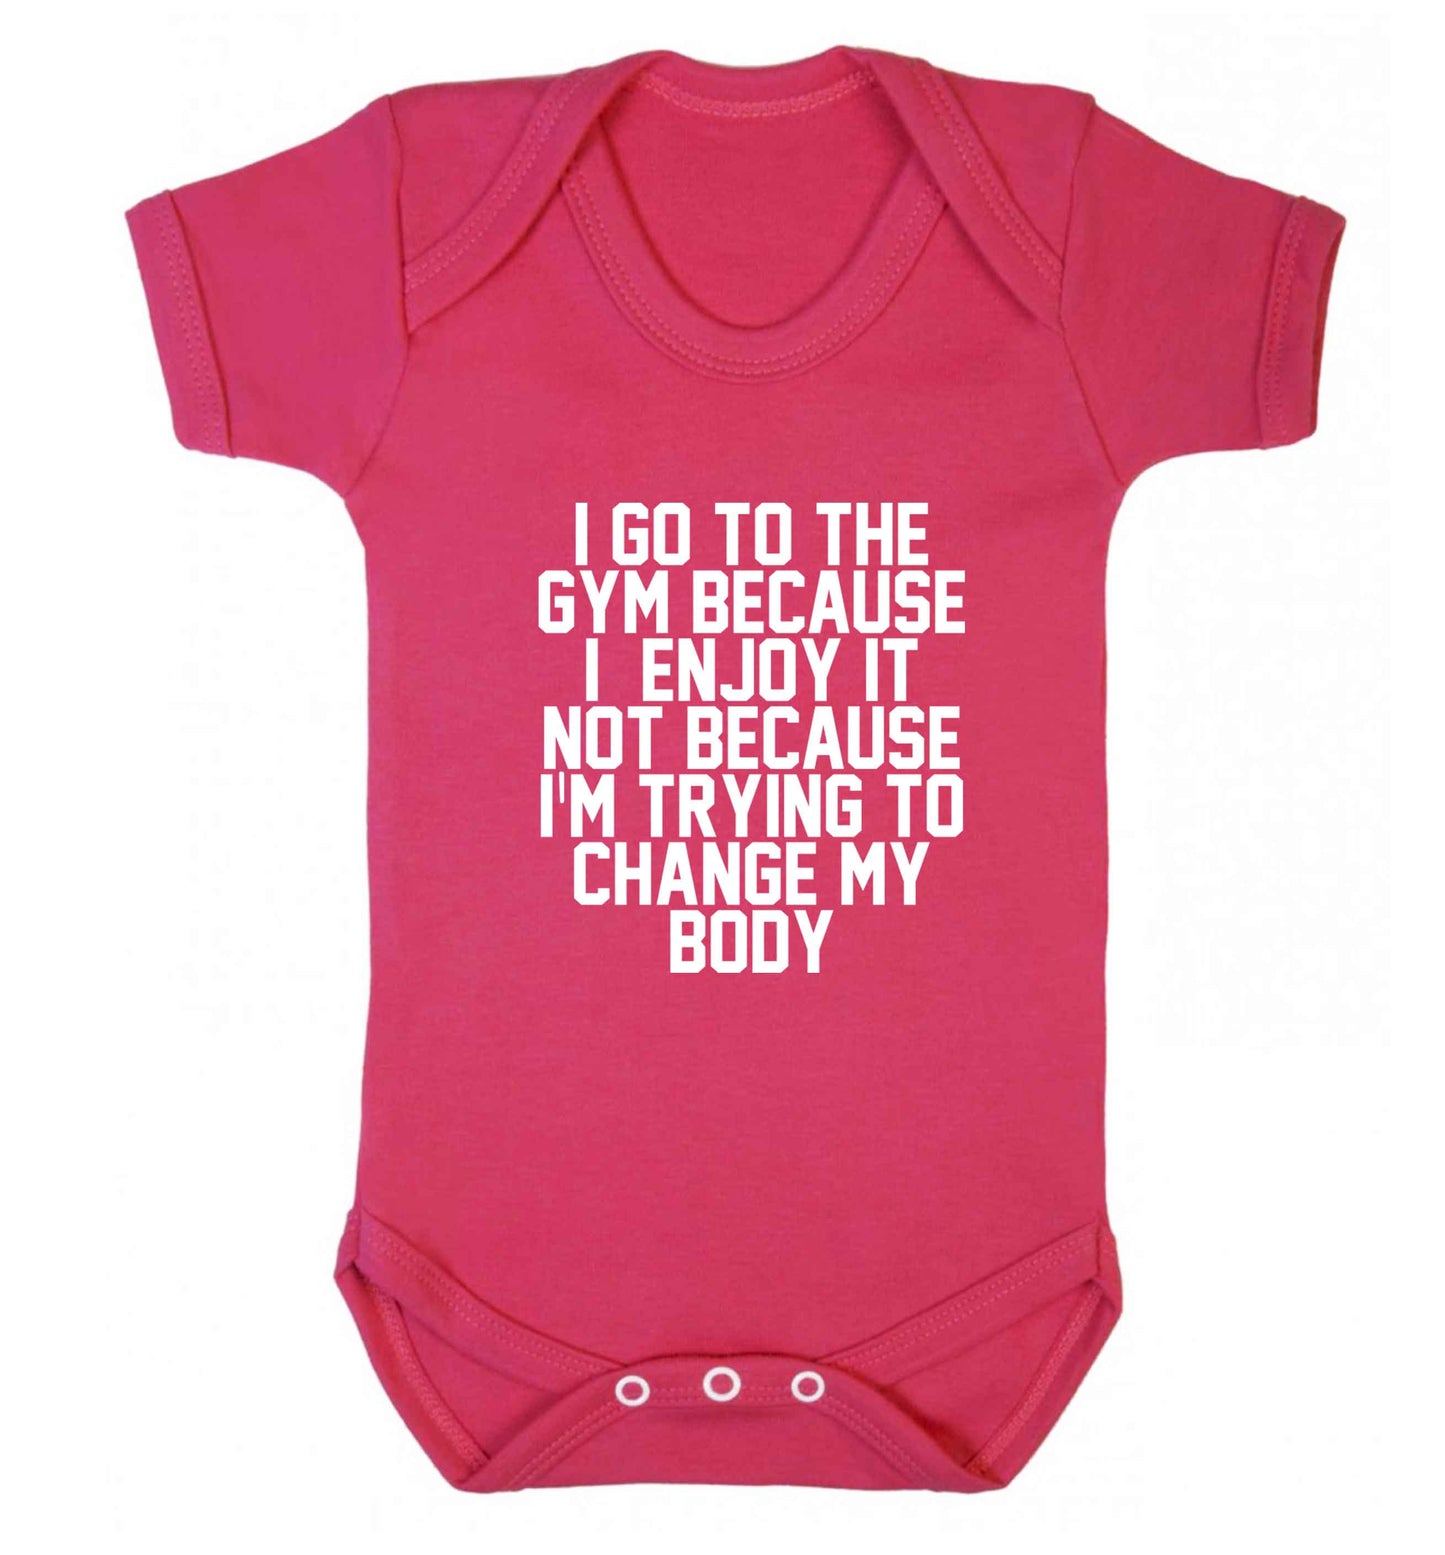 I go to the gym because I enjoy it not because I'm trying to change my body baby vest dark pink 18-24 months